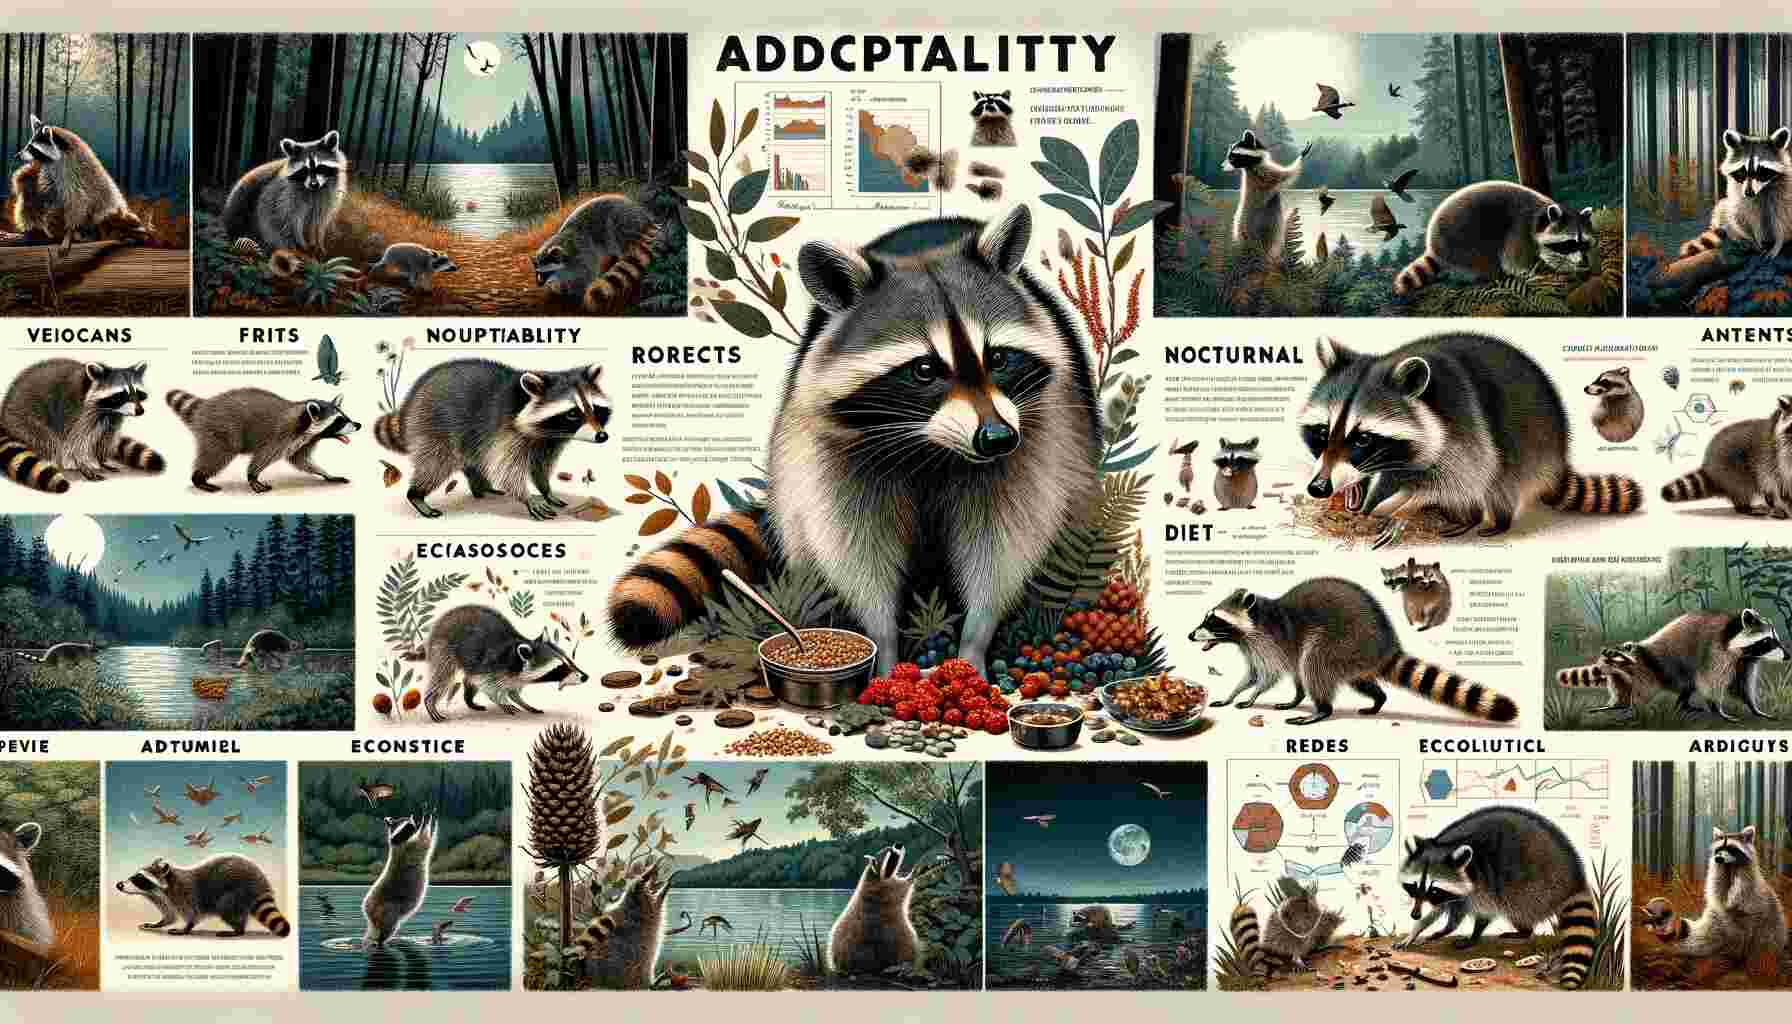 Here is a collage summarizing the key aspects of raccoons. It includes images showcasing their adaptability in different environments, their nocturnal activities, diverse diet, and role in the ecosystem. This visual encapsulates the multifaceted nature of raccoons, their behavior, and their significance in the natural world.